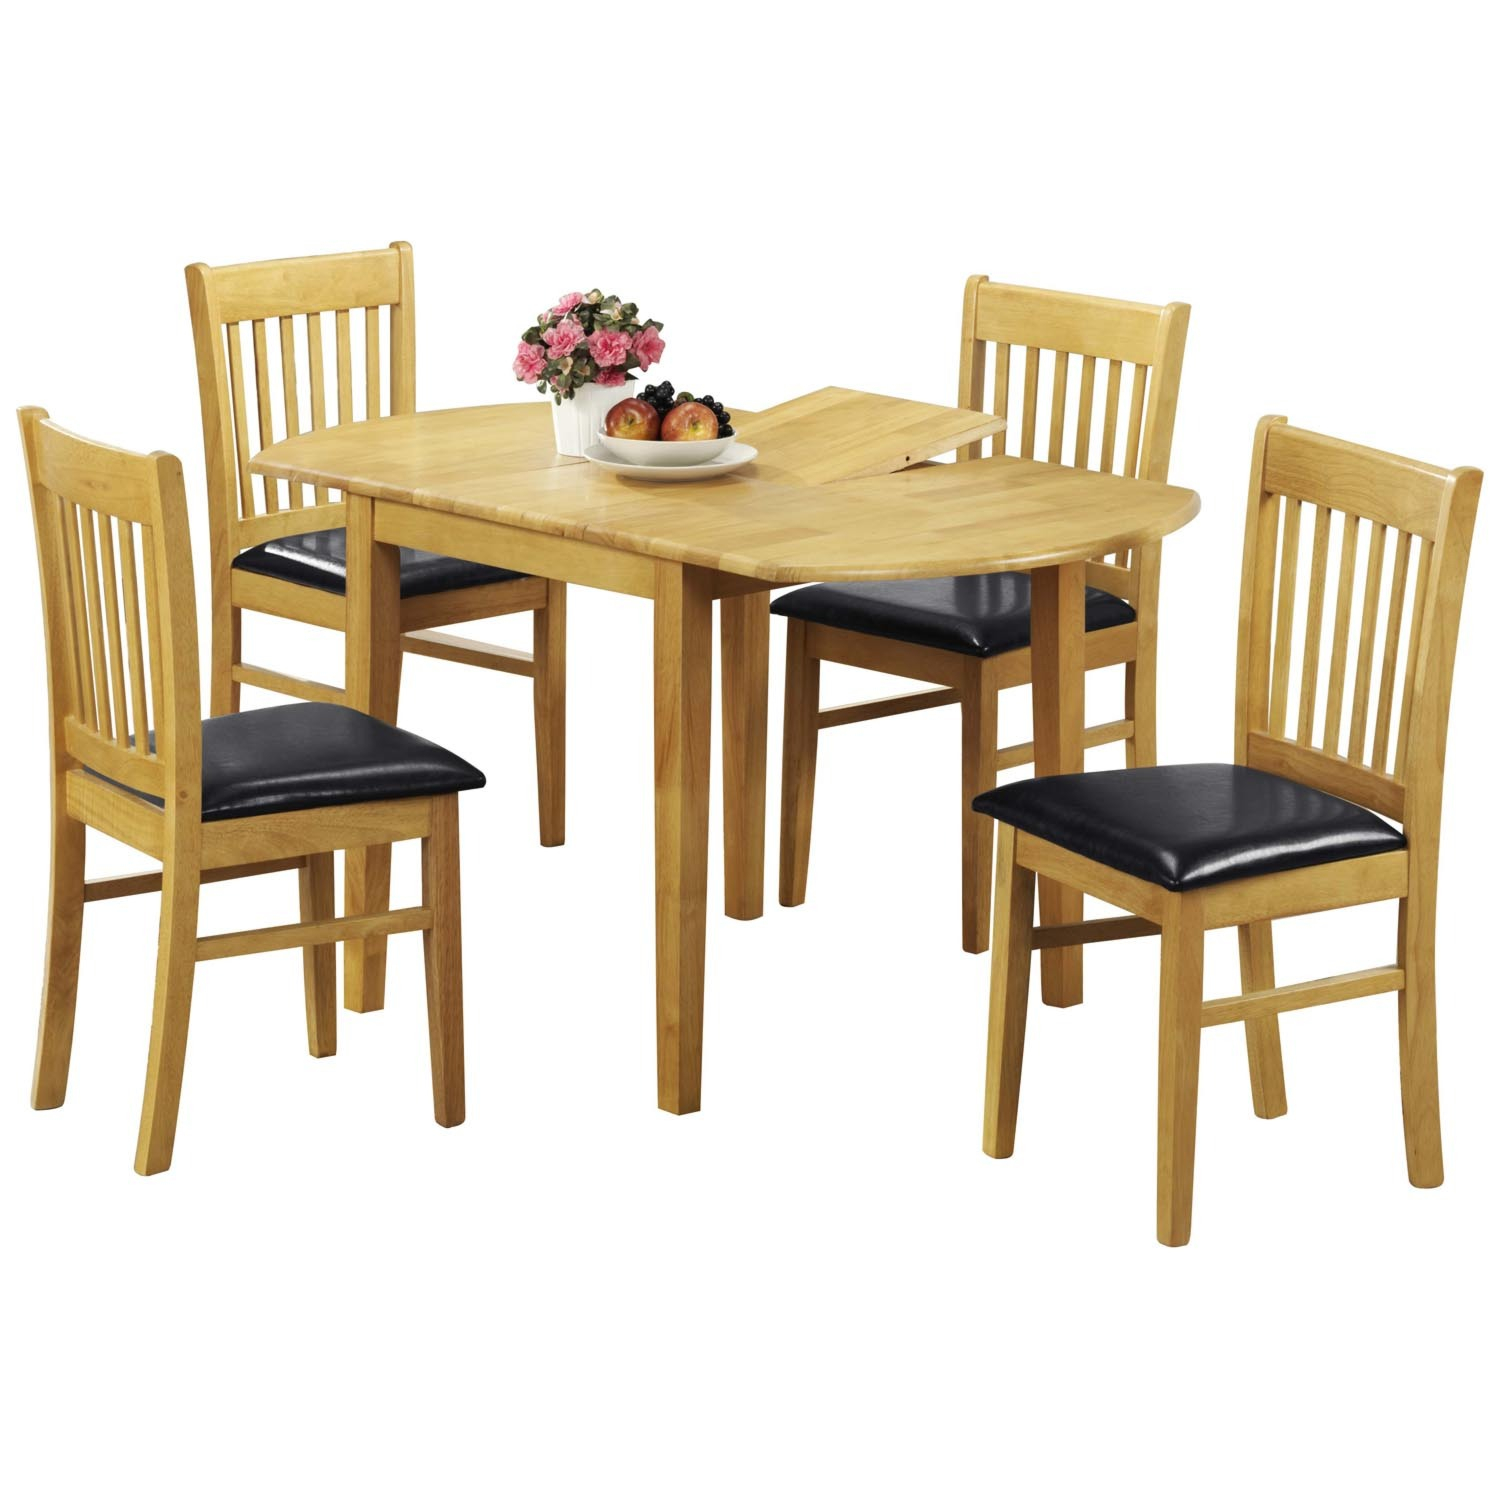 Sussex Dining Table And Four Chairs Set regarding dimensions 1500 X 1500